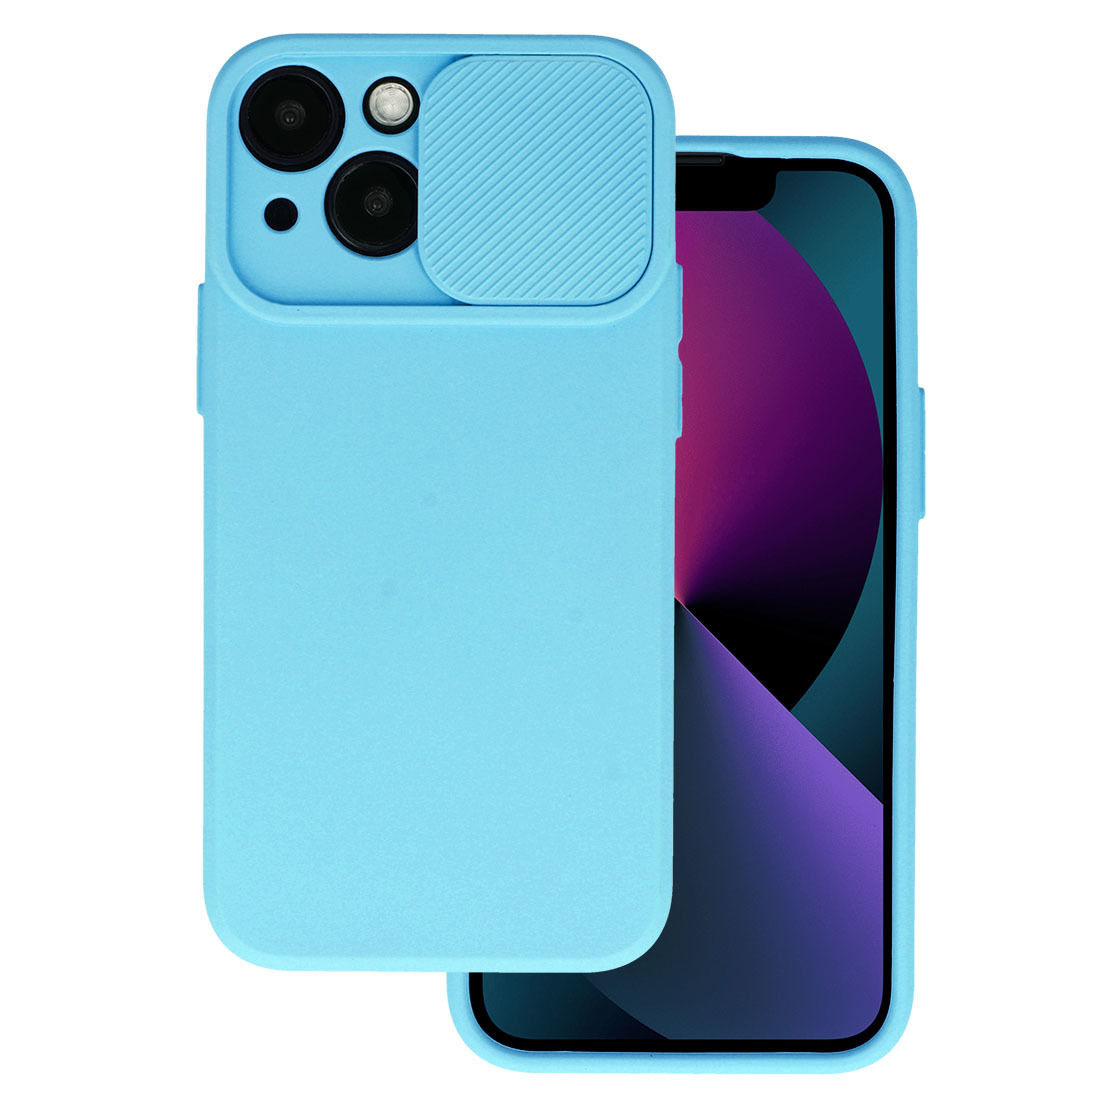 Apple Iphone 11 6.1'' Case Cover with Camshield, Light Blue | Чехол Бампер Кабура для...